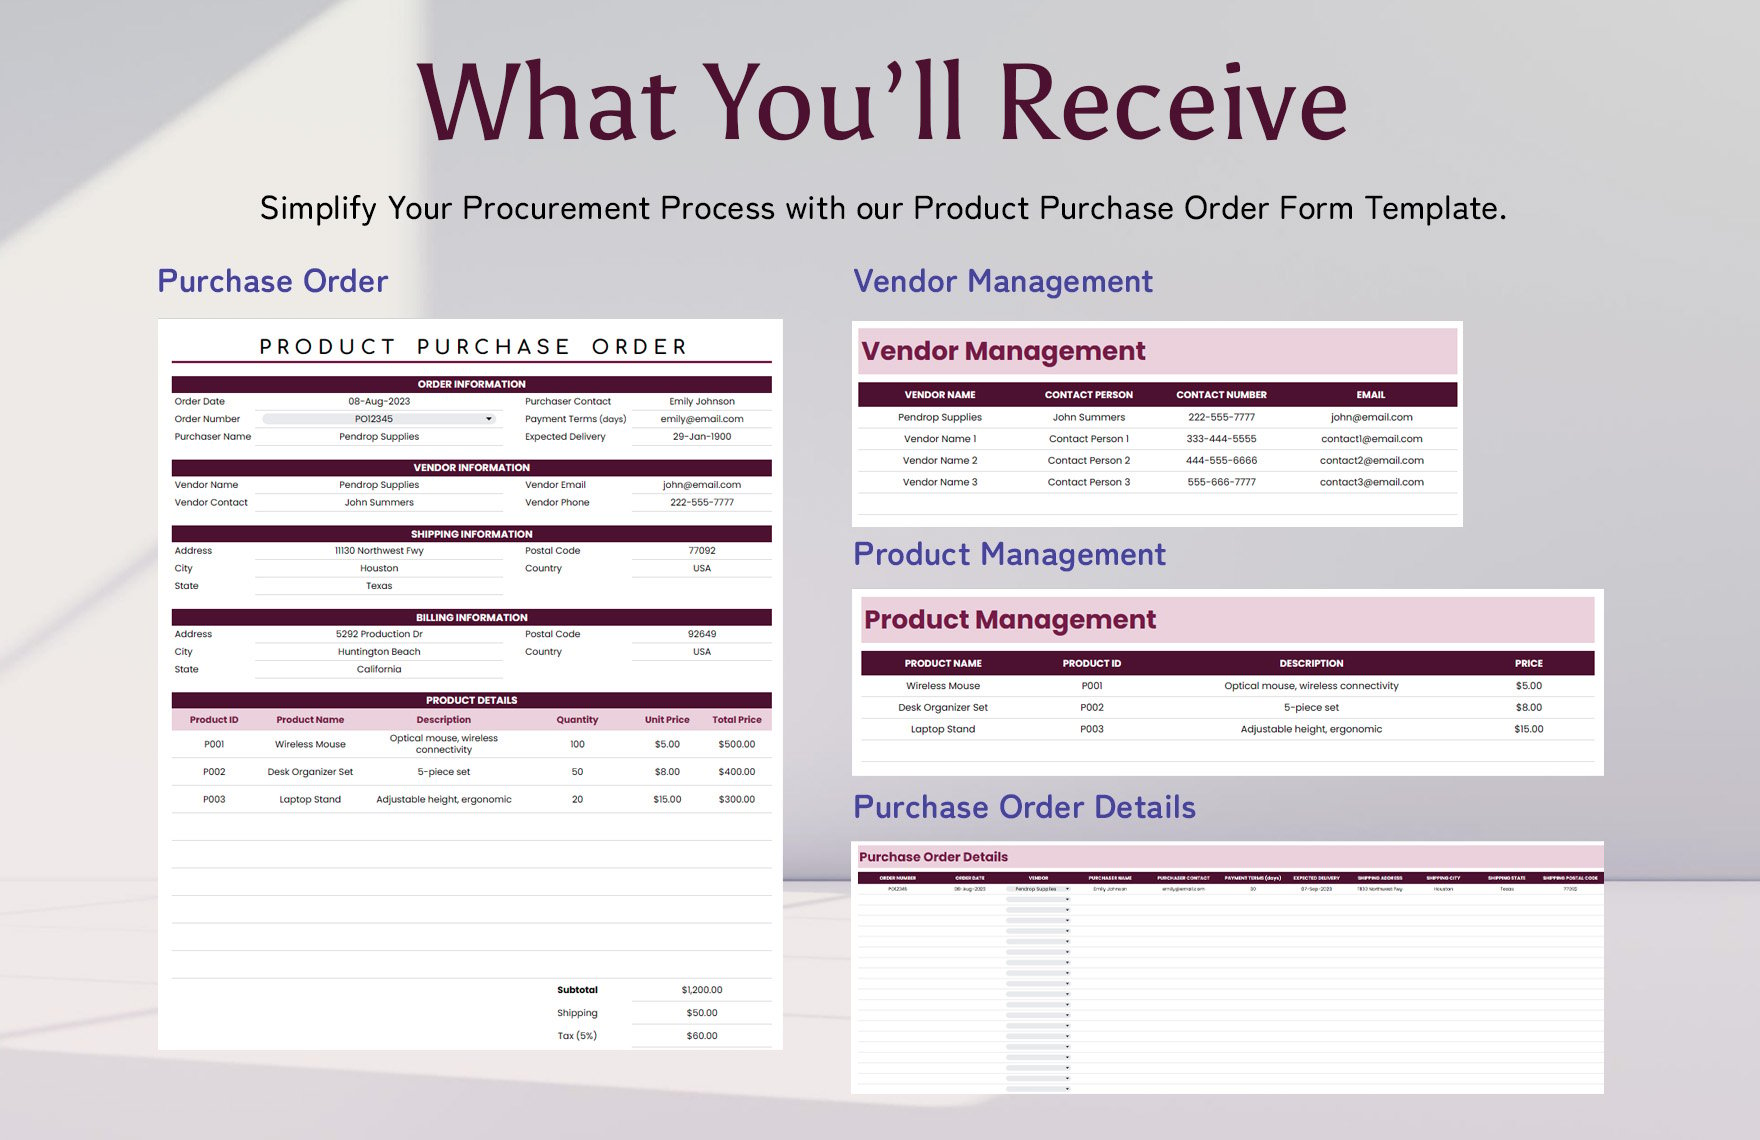 Product Purchase Order Form Template